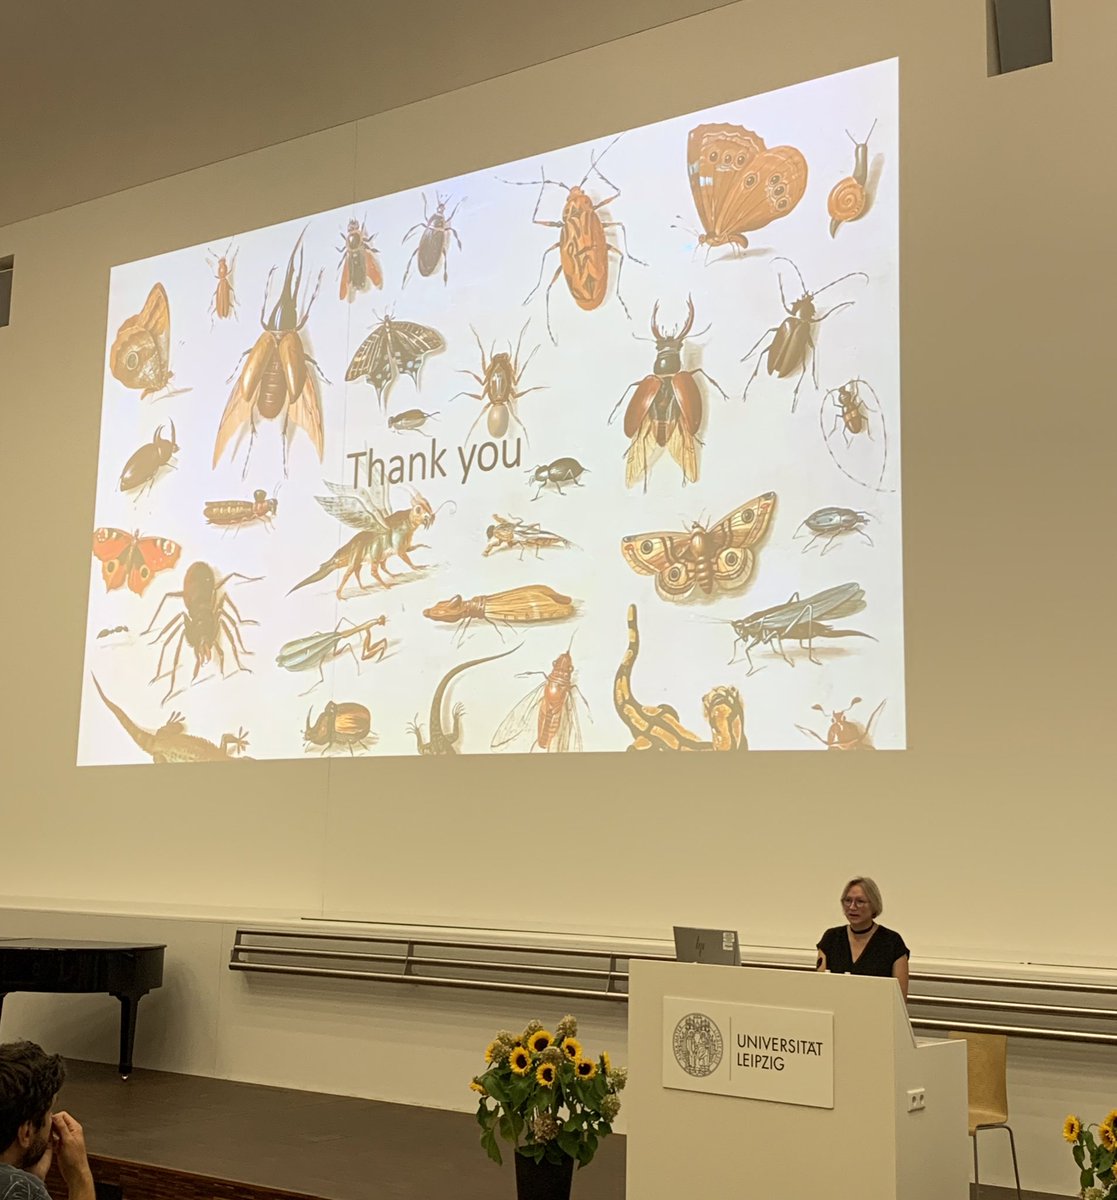 The keynote talk of @EstherTurnhout (questions and answers included) was possibly one of the best I’ve heard at a conference. Inspiring to insist in questioning how and why we do science #gfoe23